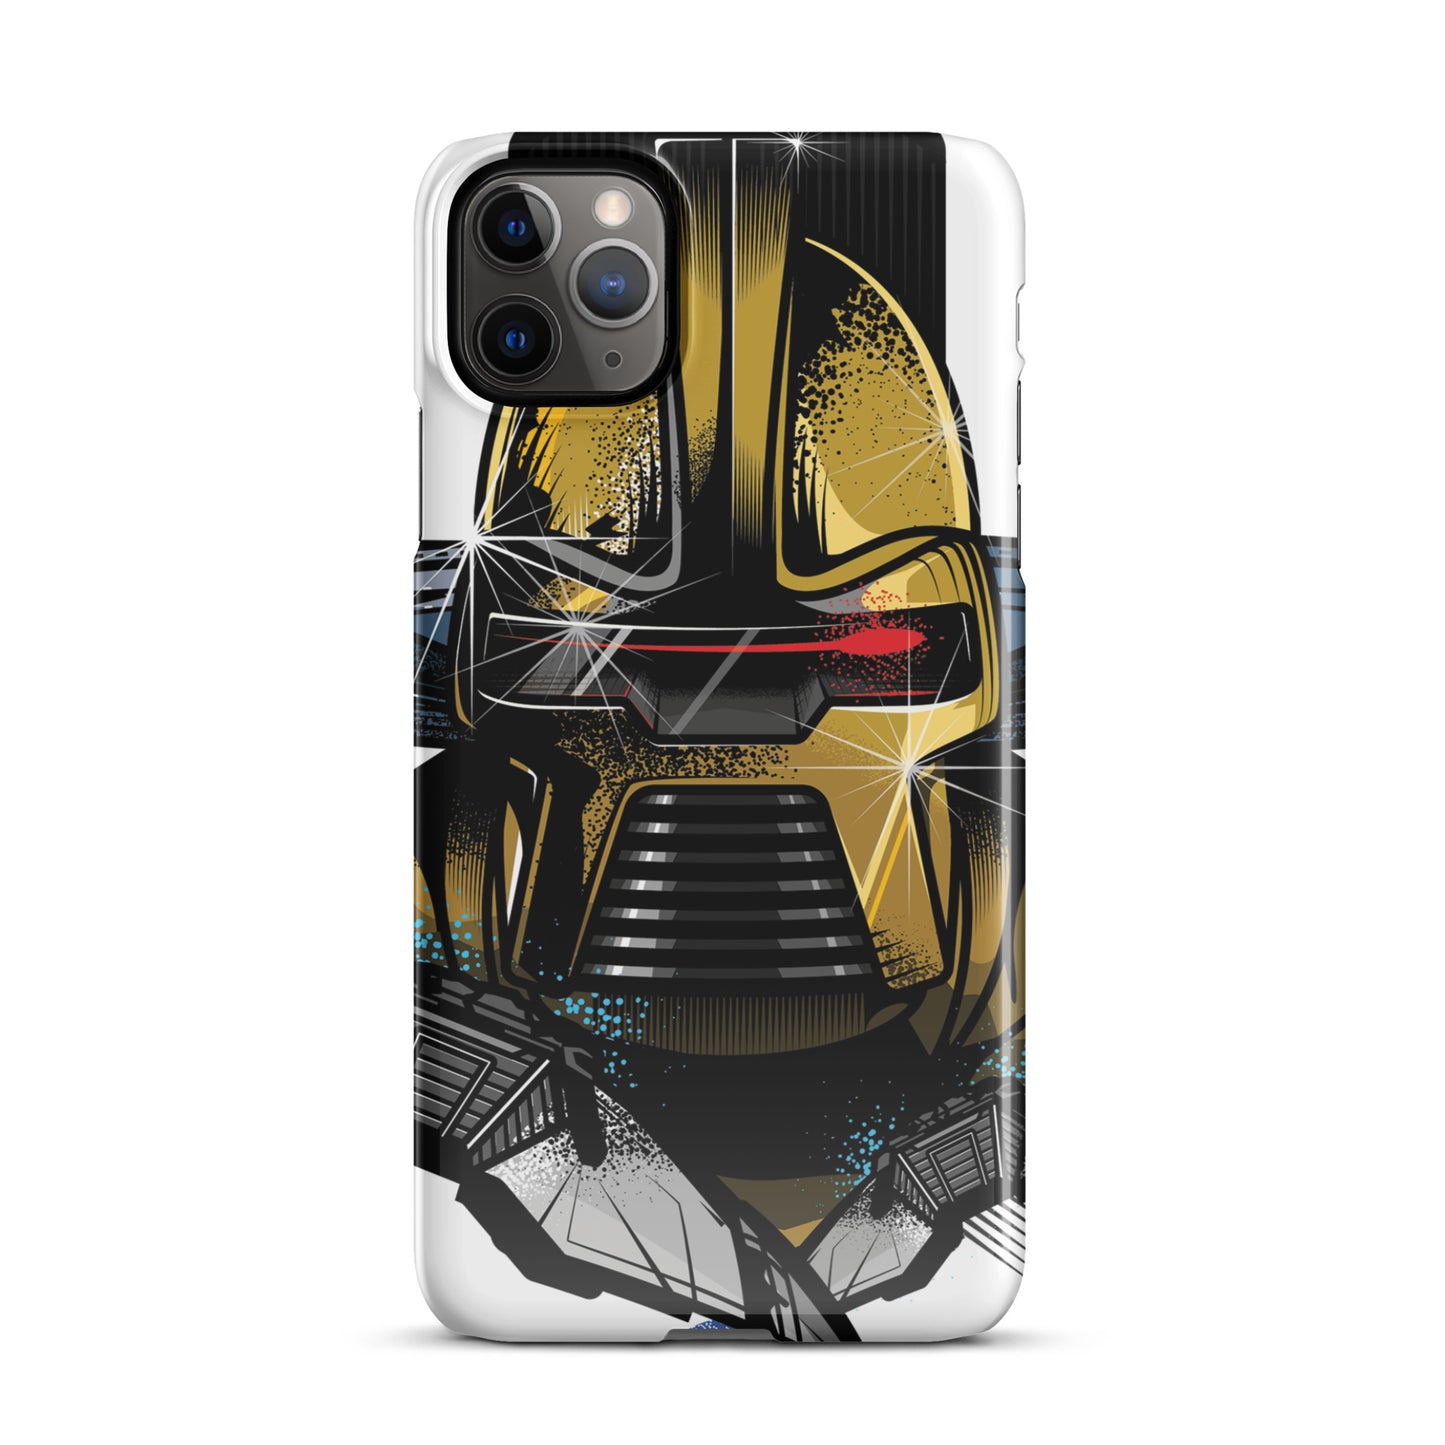 By Your Command iPhone Case